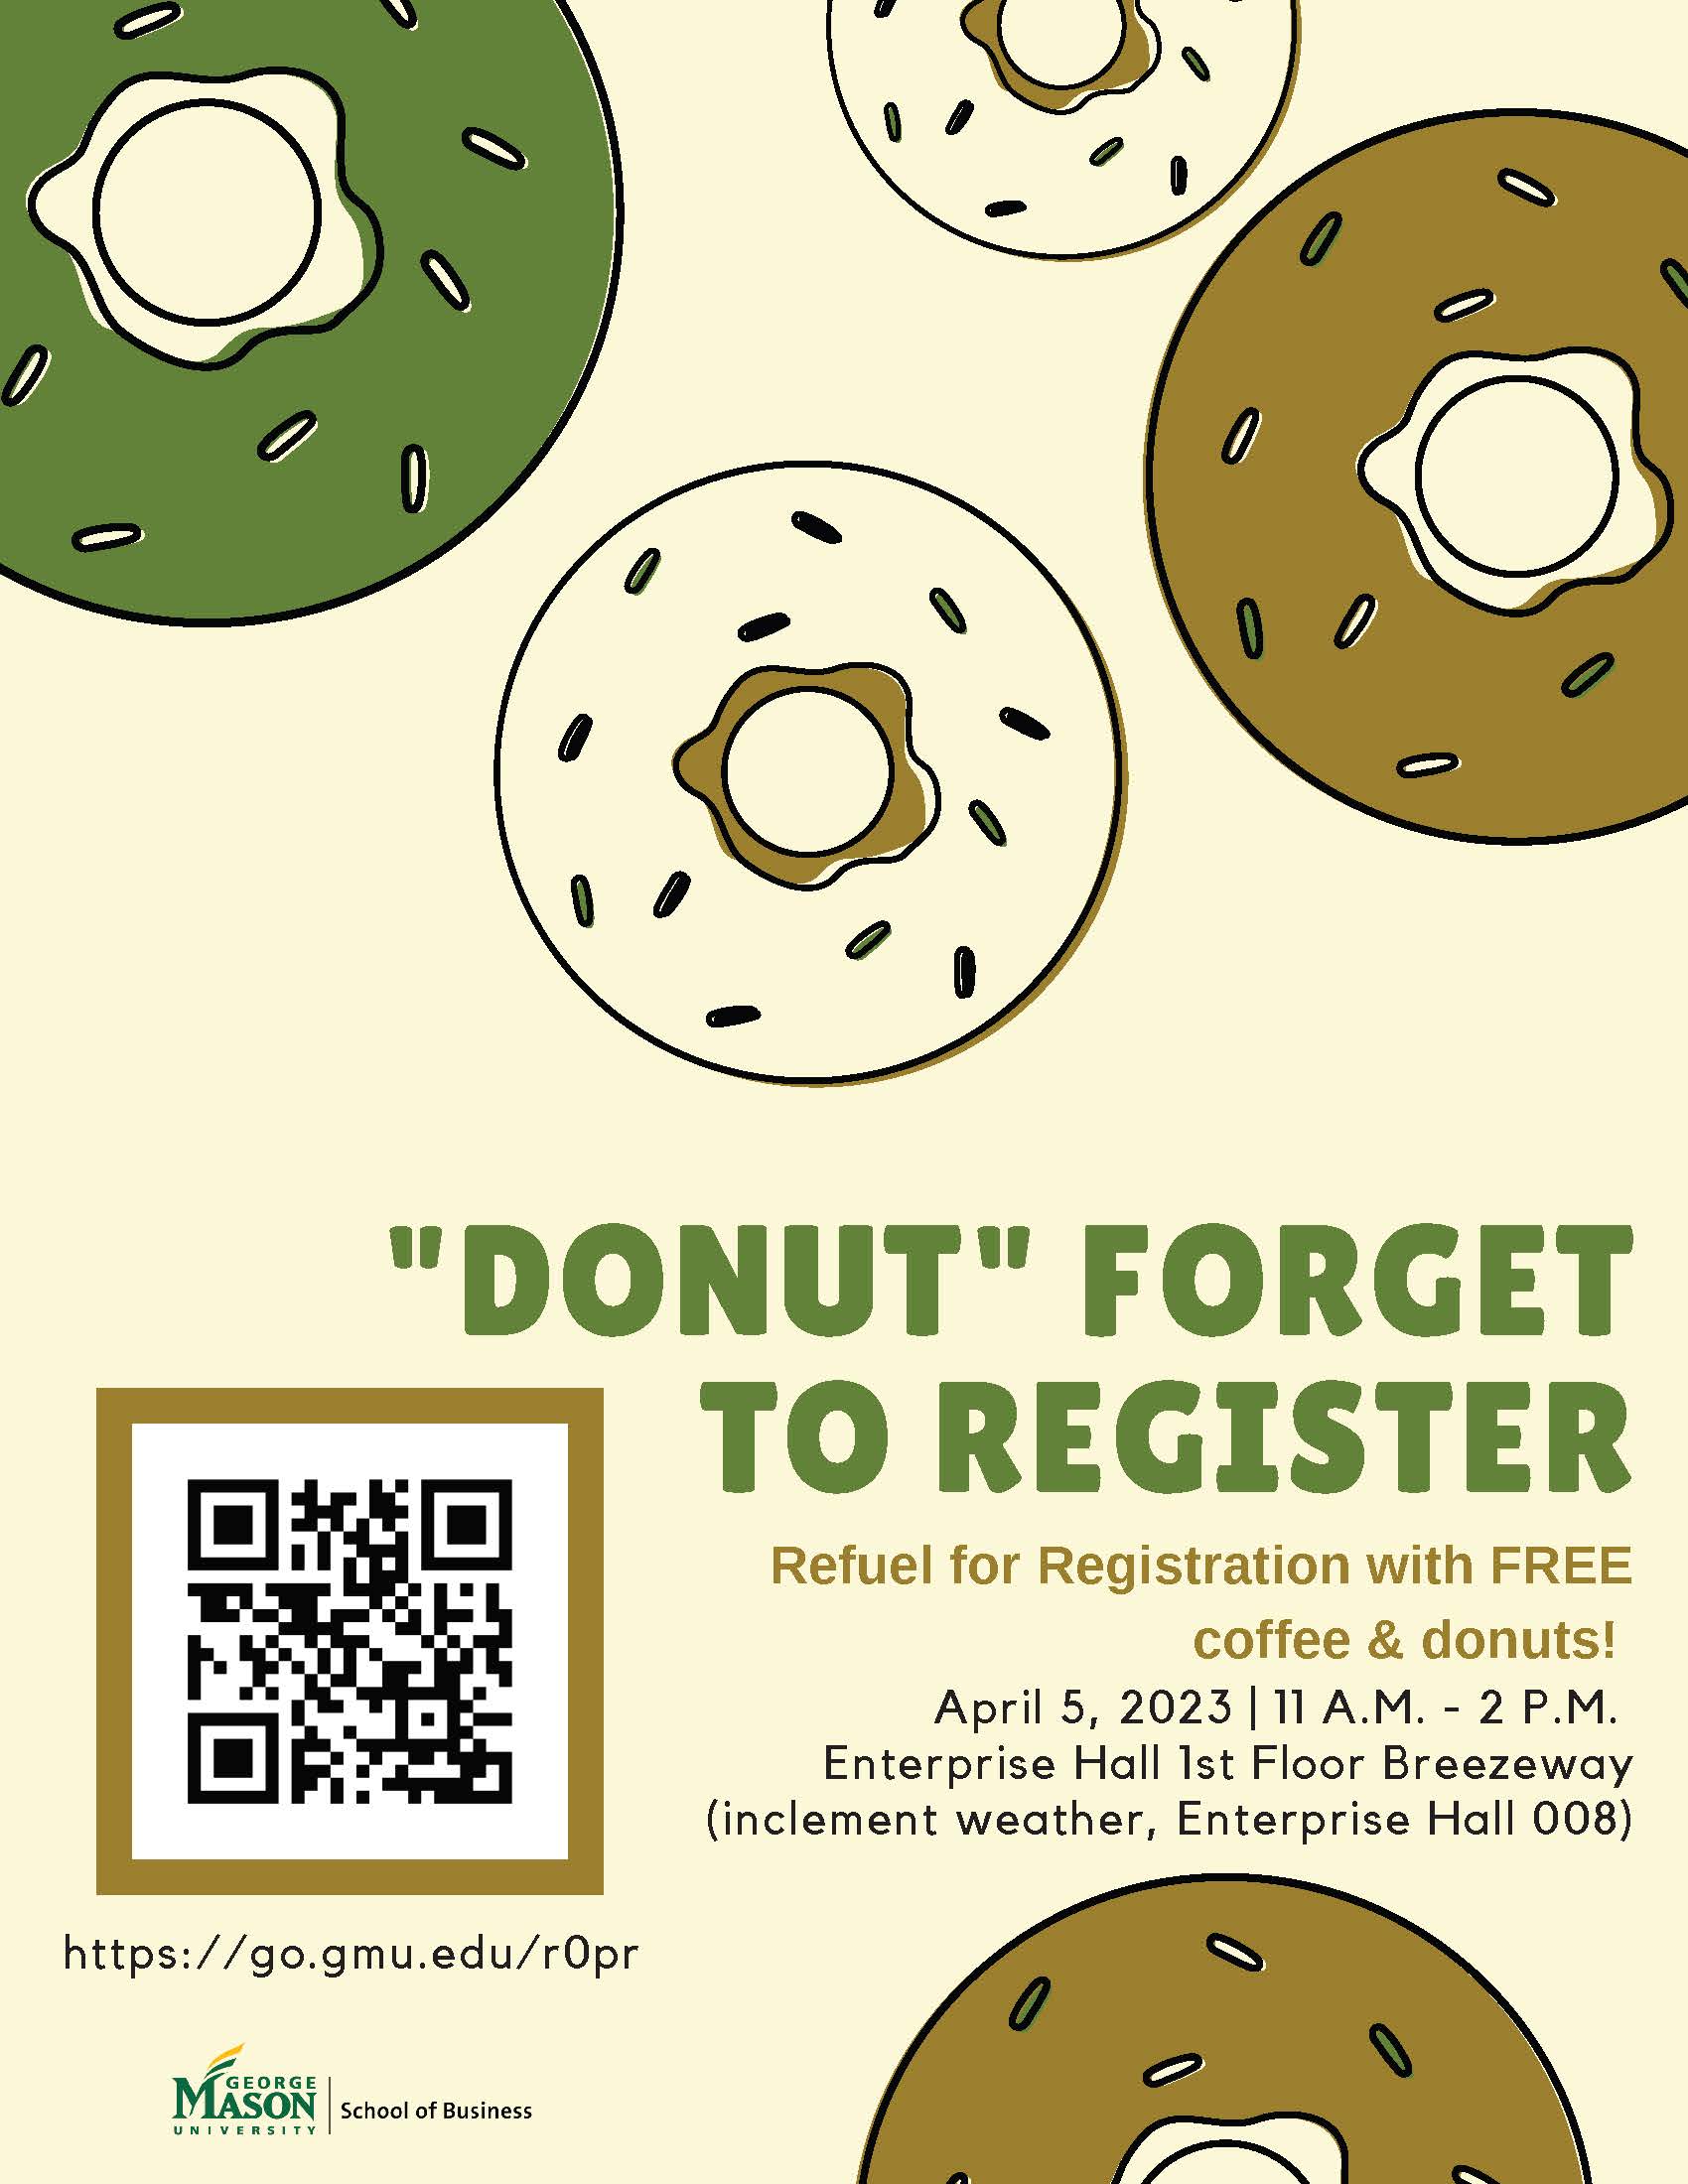 Donut Forget to Register Event for School of Business undergrad students; free coffee and donuts; April 5 from 11am-2pm.